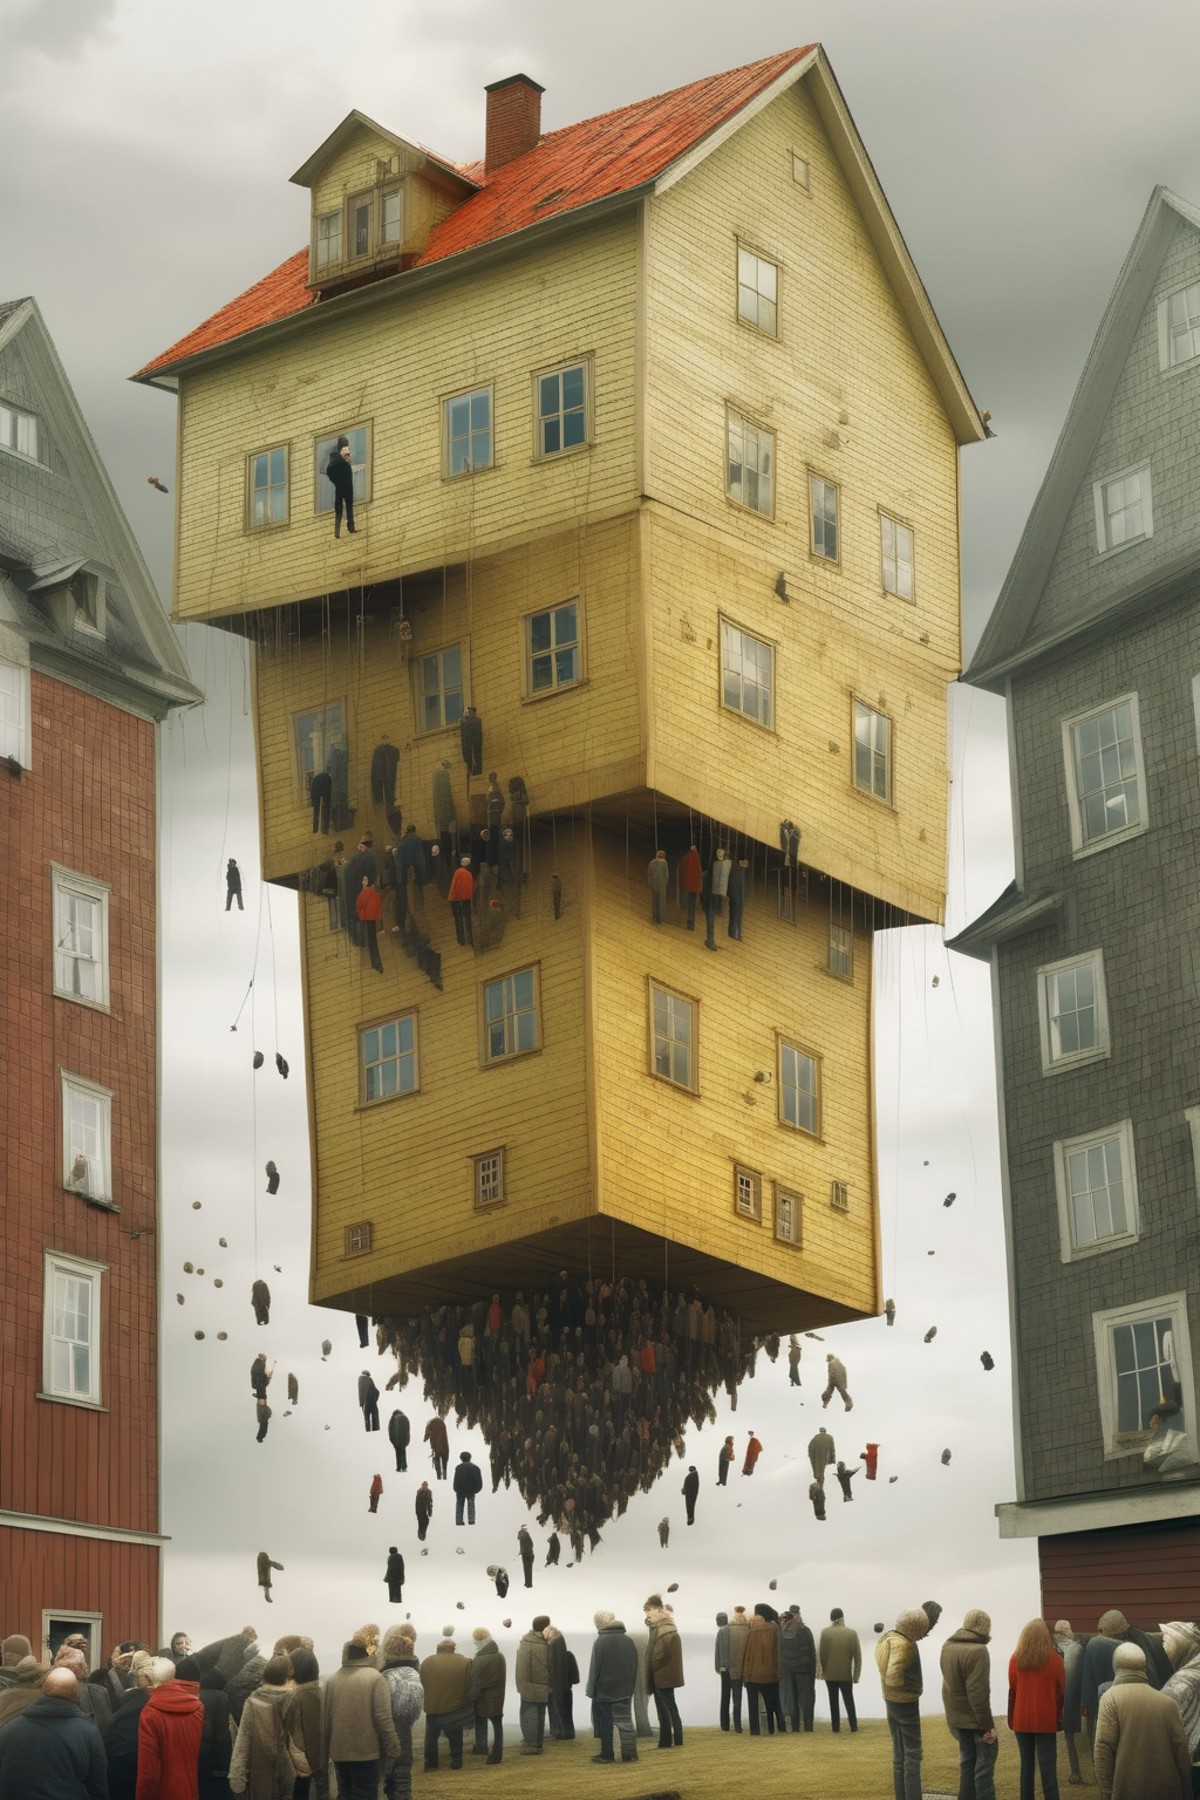 <lora:Erik Johansson Style:1>Erik Johansson Style - Erik Johansson photo of upside down house defying gravity full of wind...